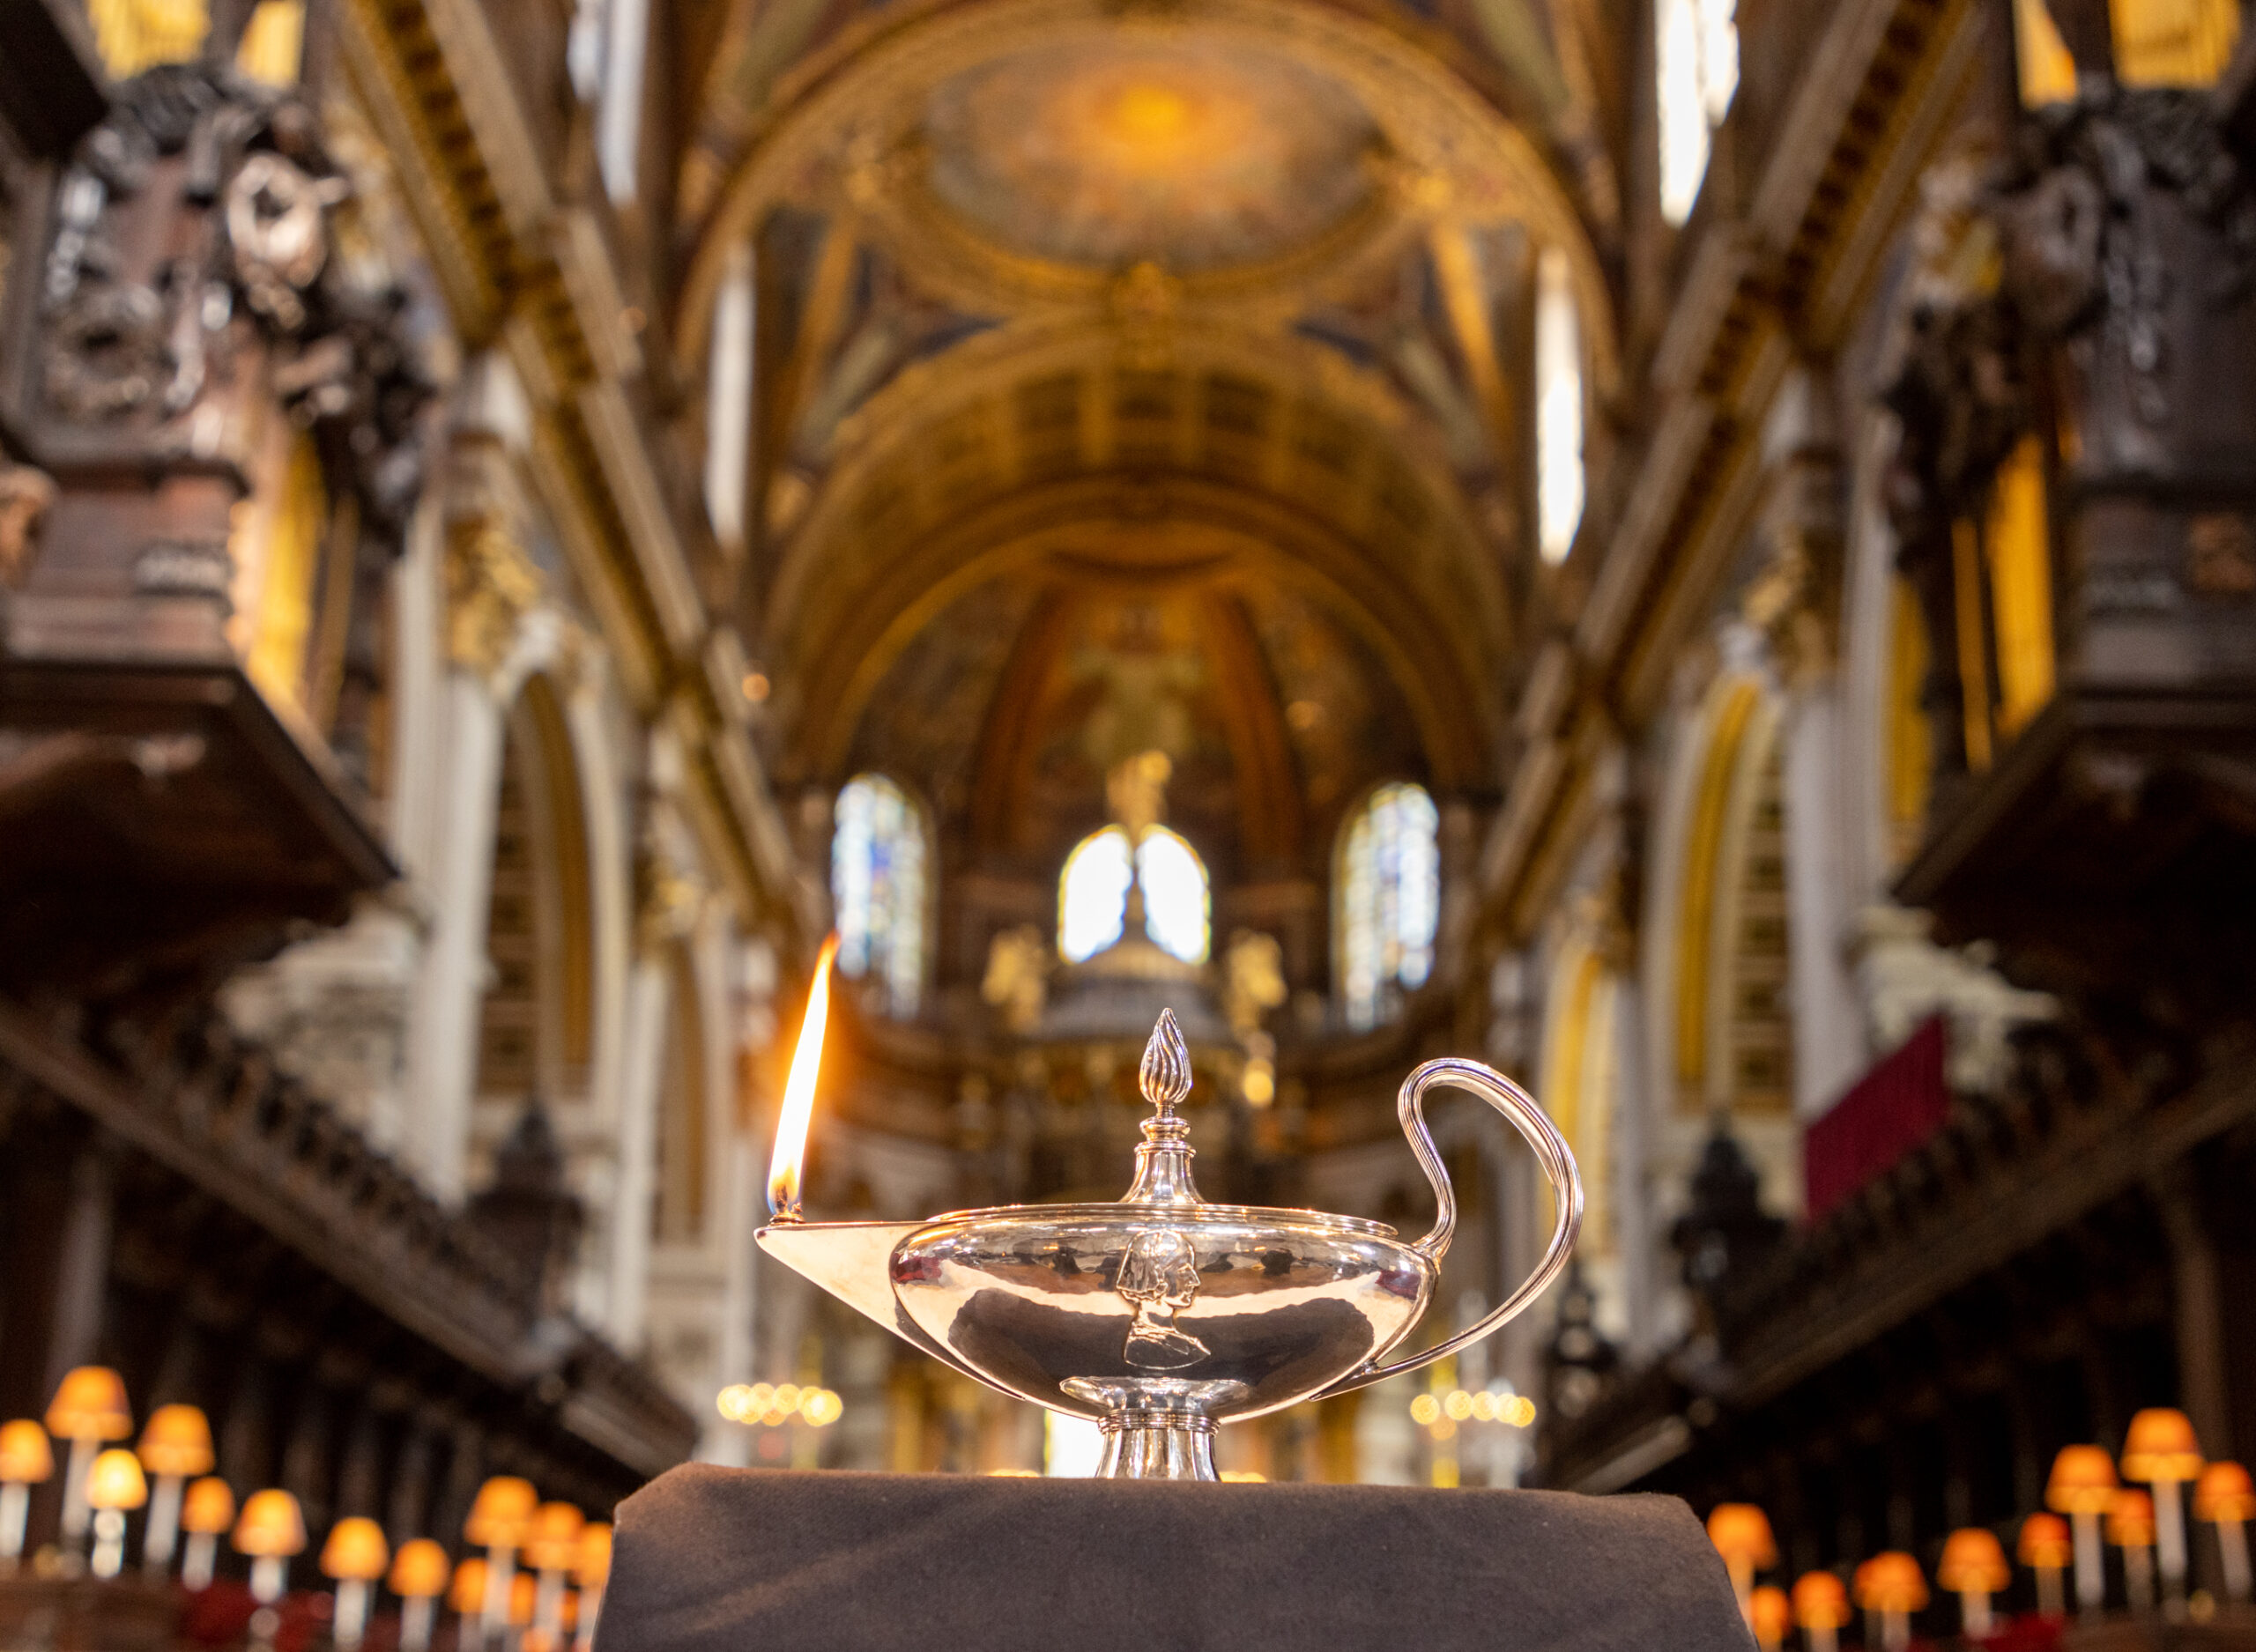 A service to commemorate the life of Florence NIghtingale was held at St. Paul's Cathedral, London today. The service was led by The Very Reverend Andrew Tremlett, Dean of St Paul's